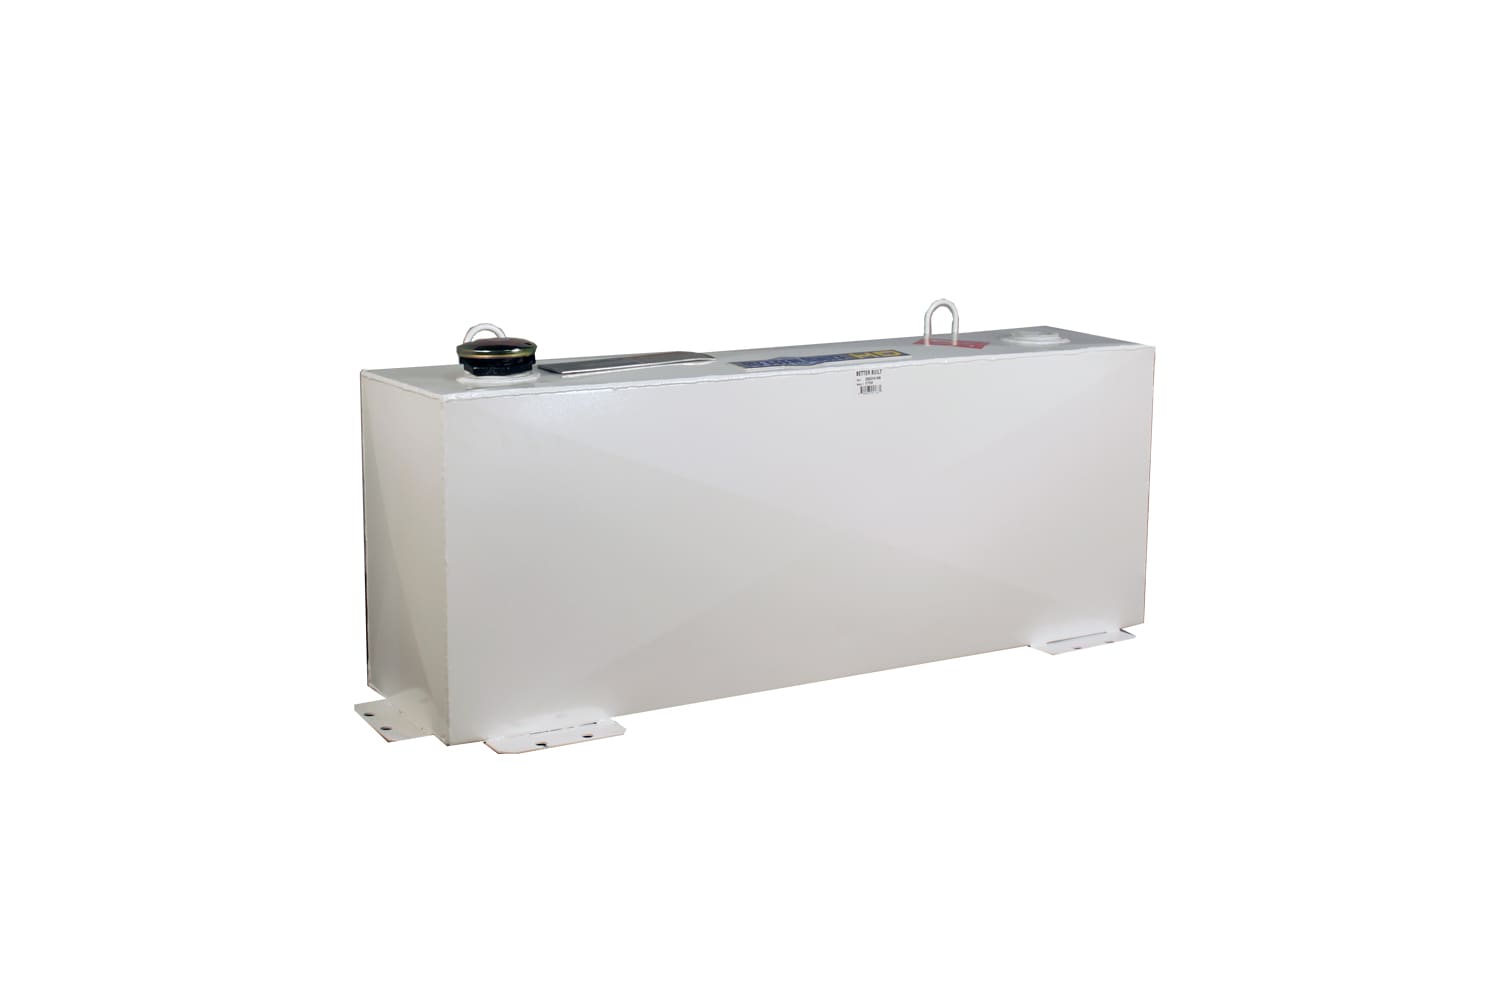 Better Built 75-Gallons White Rectangle Steel Truck Fuel Transfer Tank/Chest  Combo in the Truck Transfer Tanks department at